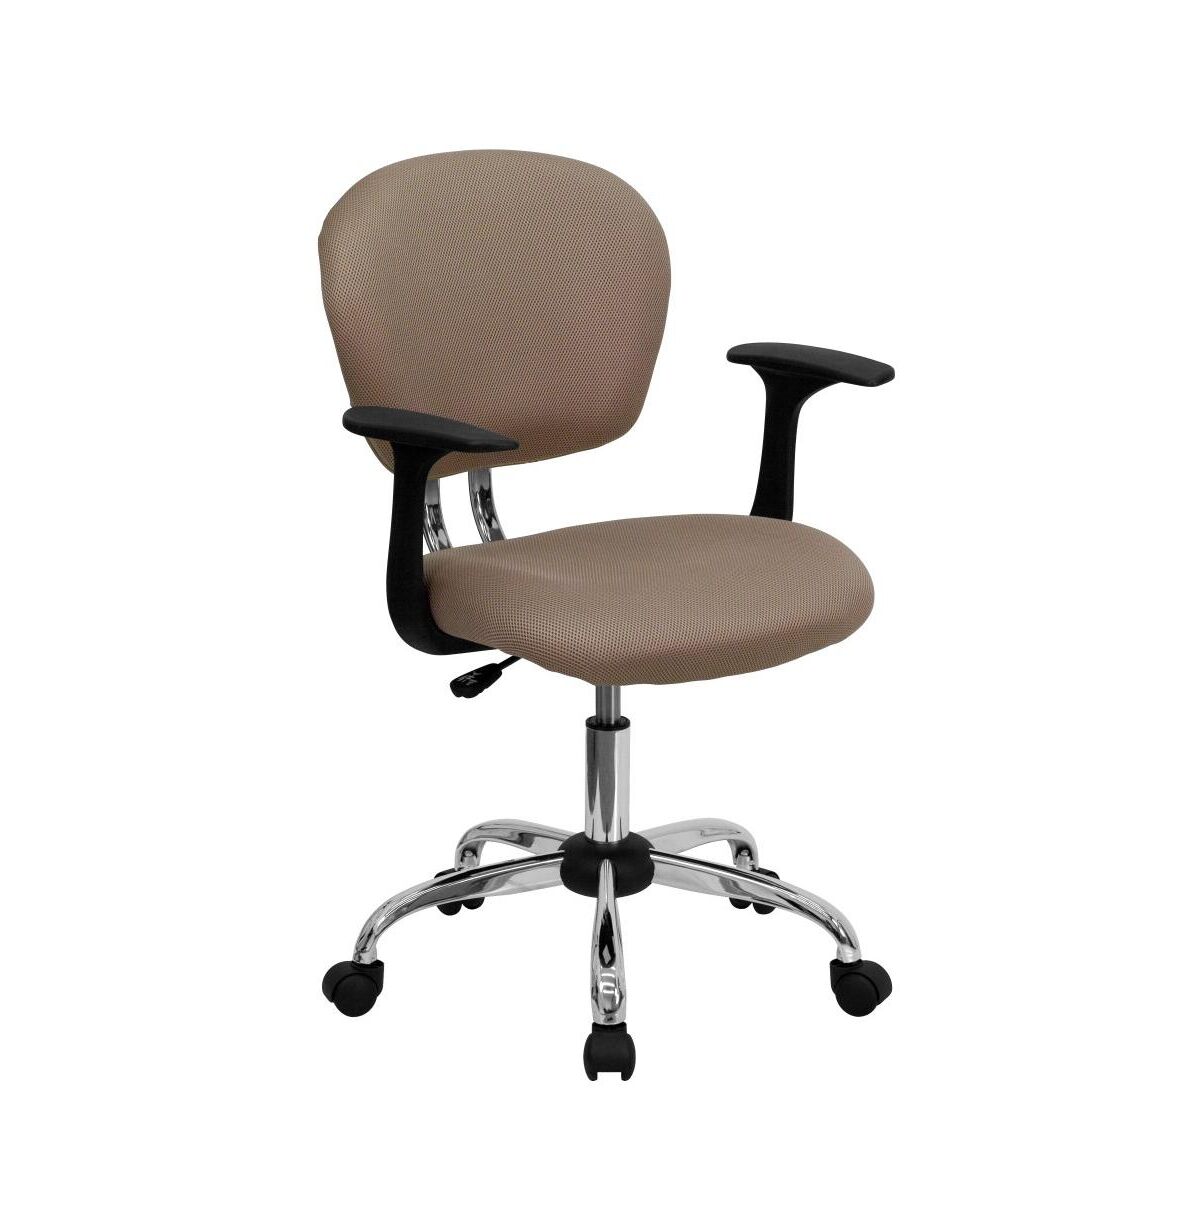 Emma+oliver Mid-Back Mesh Padded Swivel Task Office Chair With Chrome Base And Arms - Coffee brown